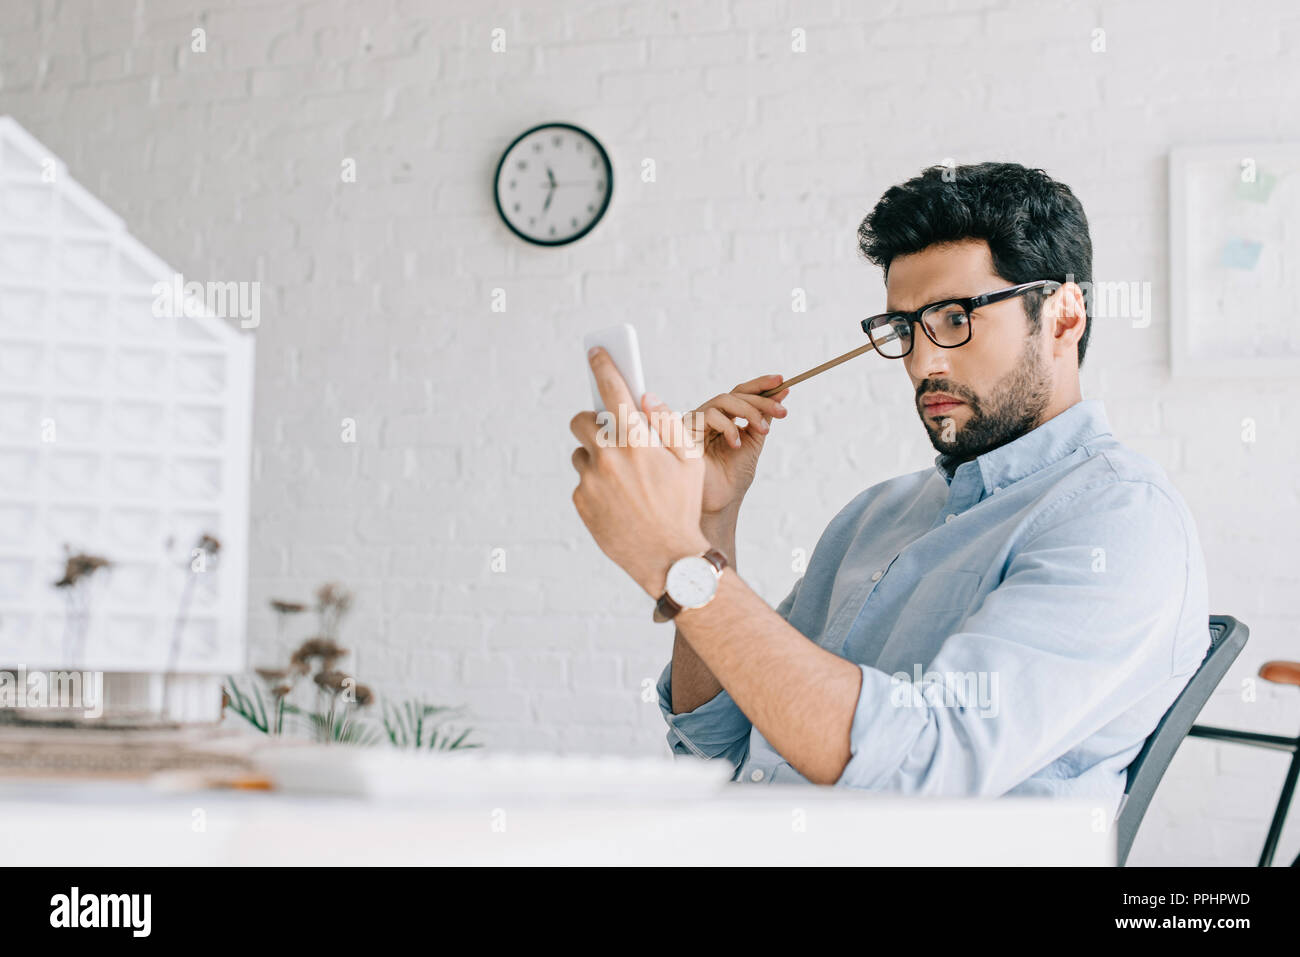 shocked architect using smartphone near architecture model in office Stock Photo